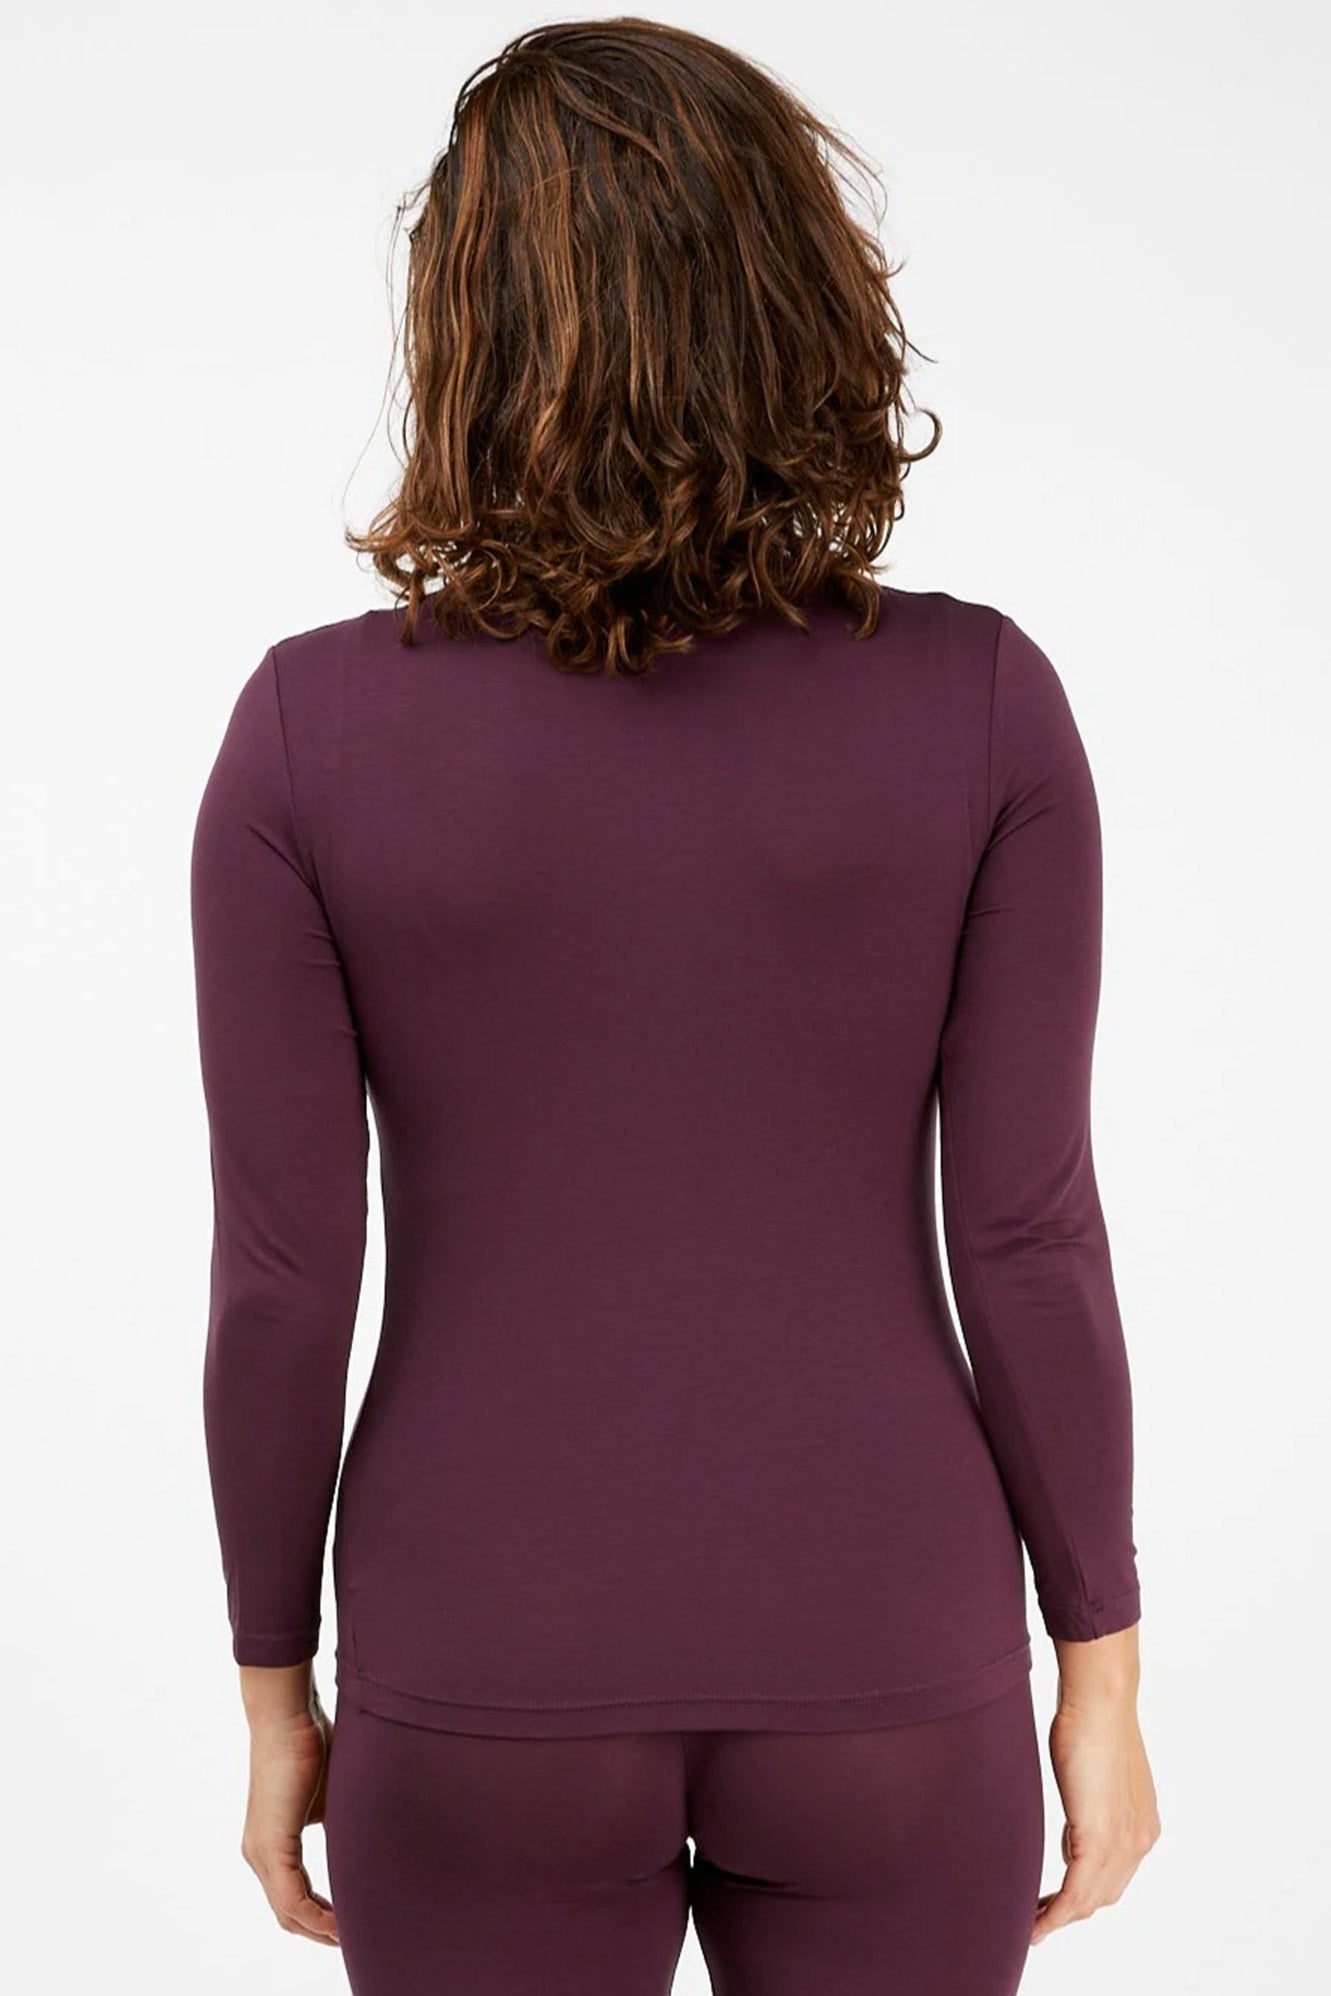 Young woman wearing Tani 79276 High Neck Long Sleeve in Wine Tasting back view